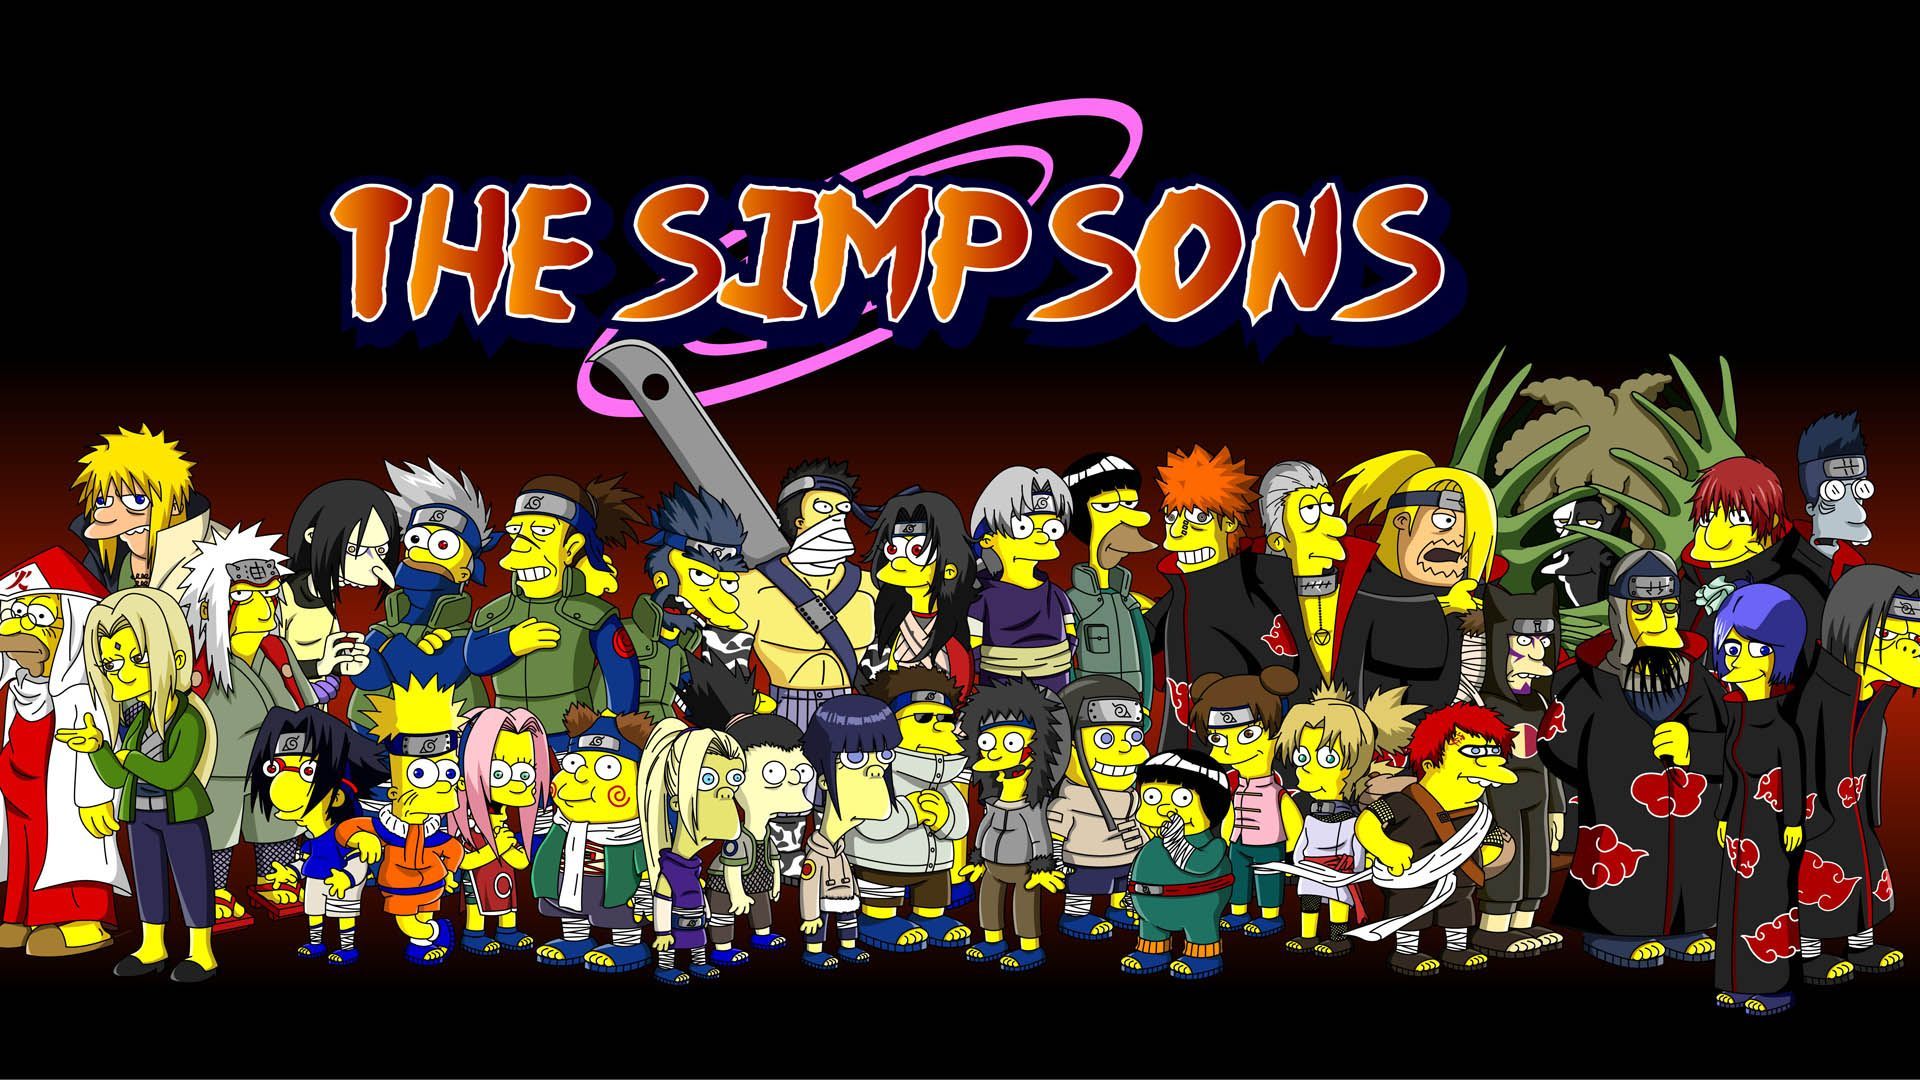 Download Naruto The Simpsons Wallpaper 1920x1080 | Full HD Wallpapers